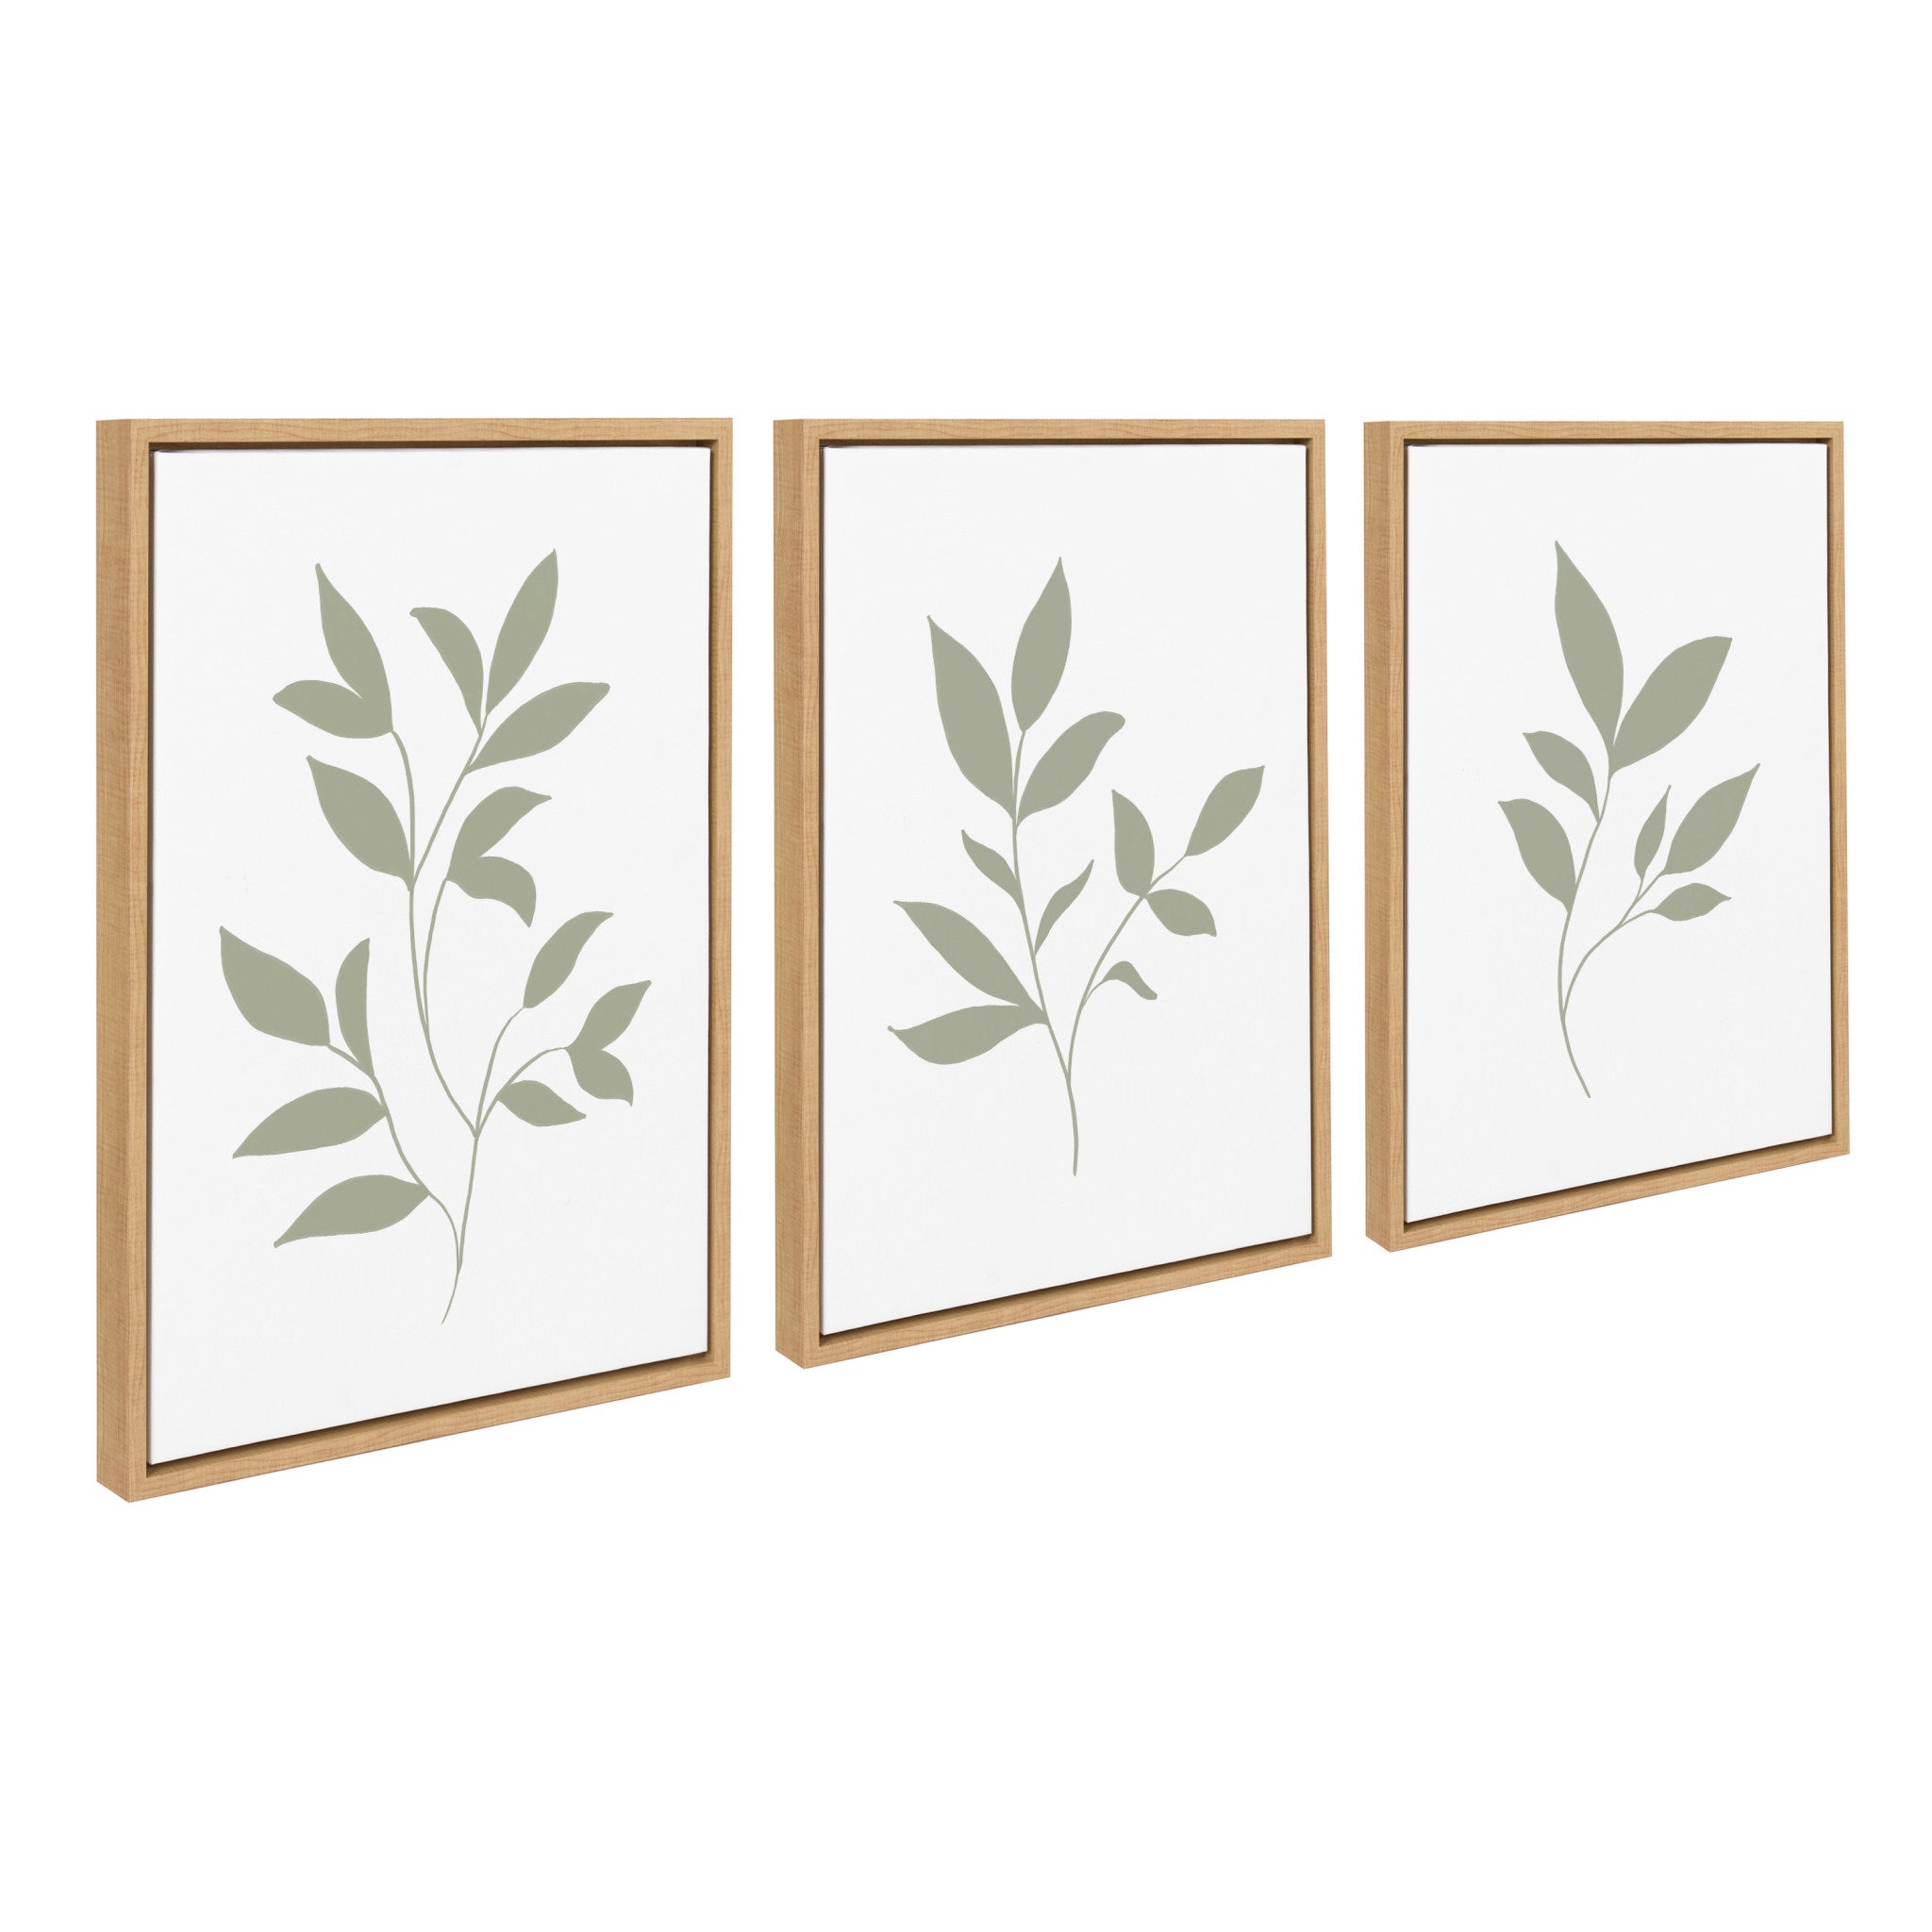 Sylvie Modern Sage Green Botanical Outdoor Nature Print 1, 2 and 3 Framed Canvas by The Creative Bunch Studio